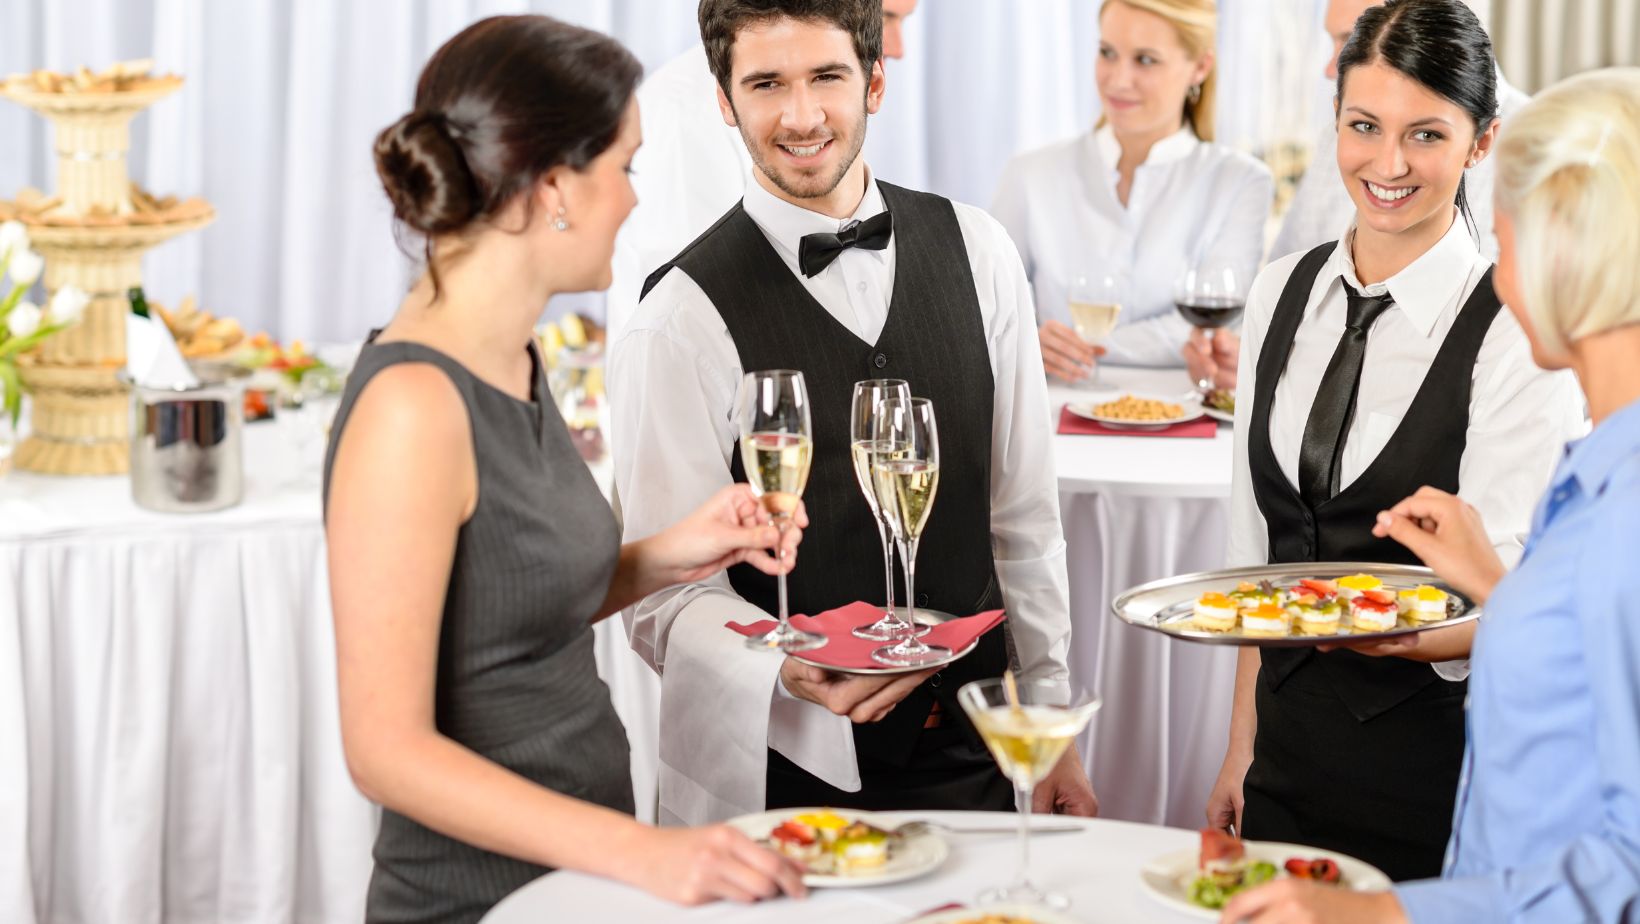 managed foodservice differs from commercial foodservice in that